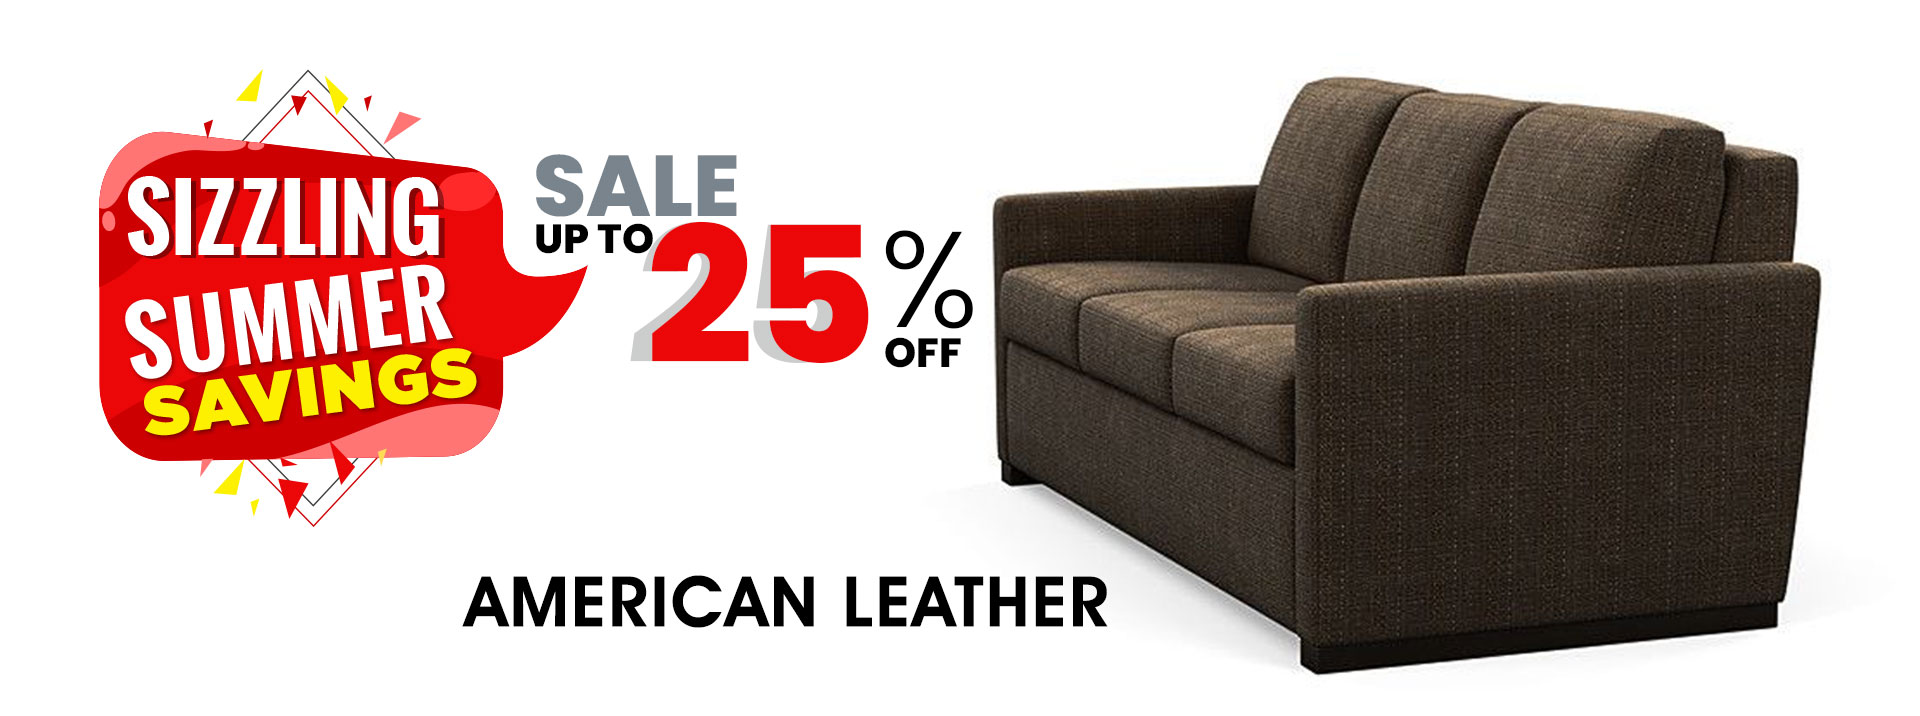 American Leather Specials